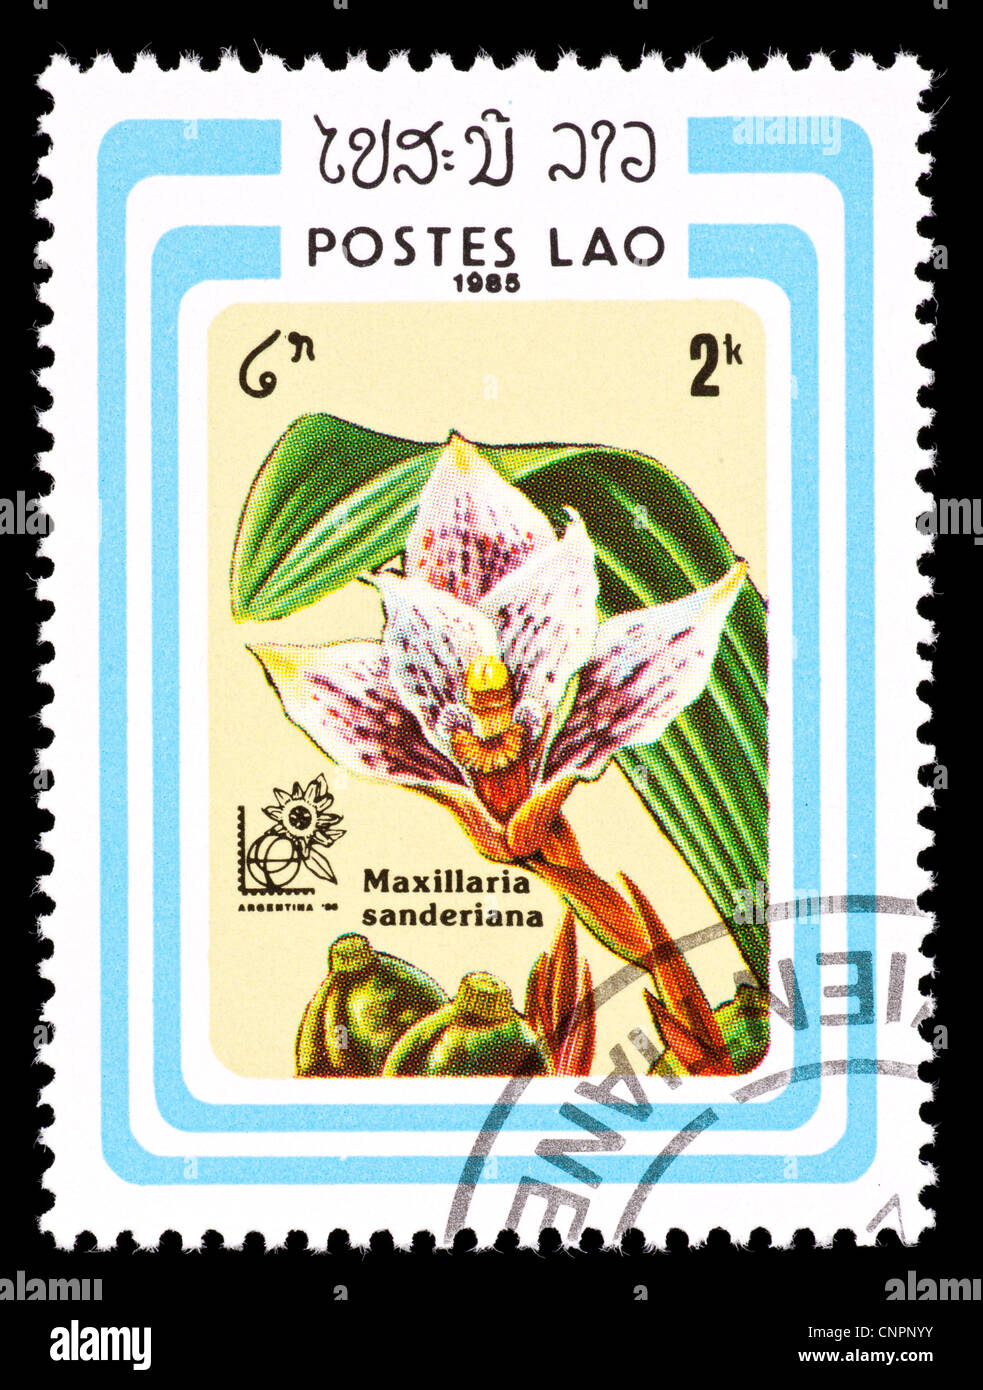 Postage stamp from Laos depicting a tropical  Sander's Maxillaria orchid (Maxillaria sanderiana) Stock Photo